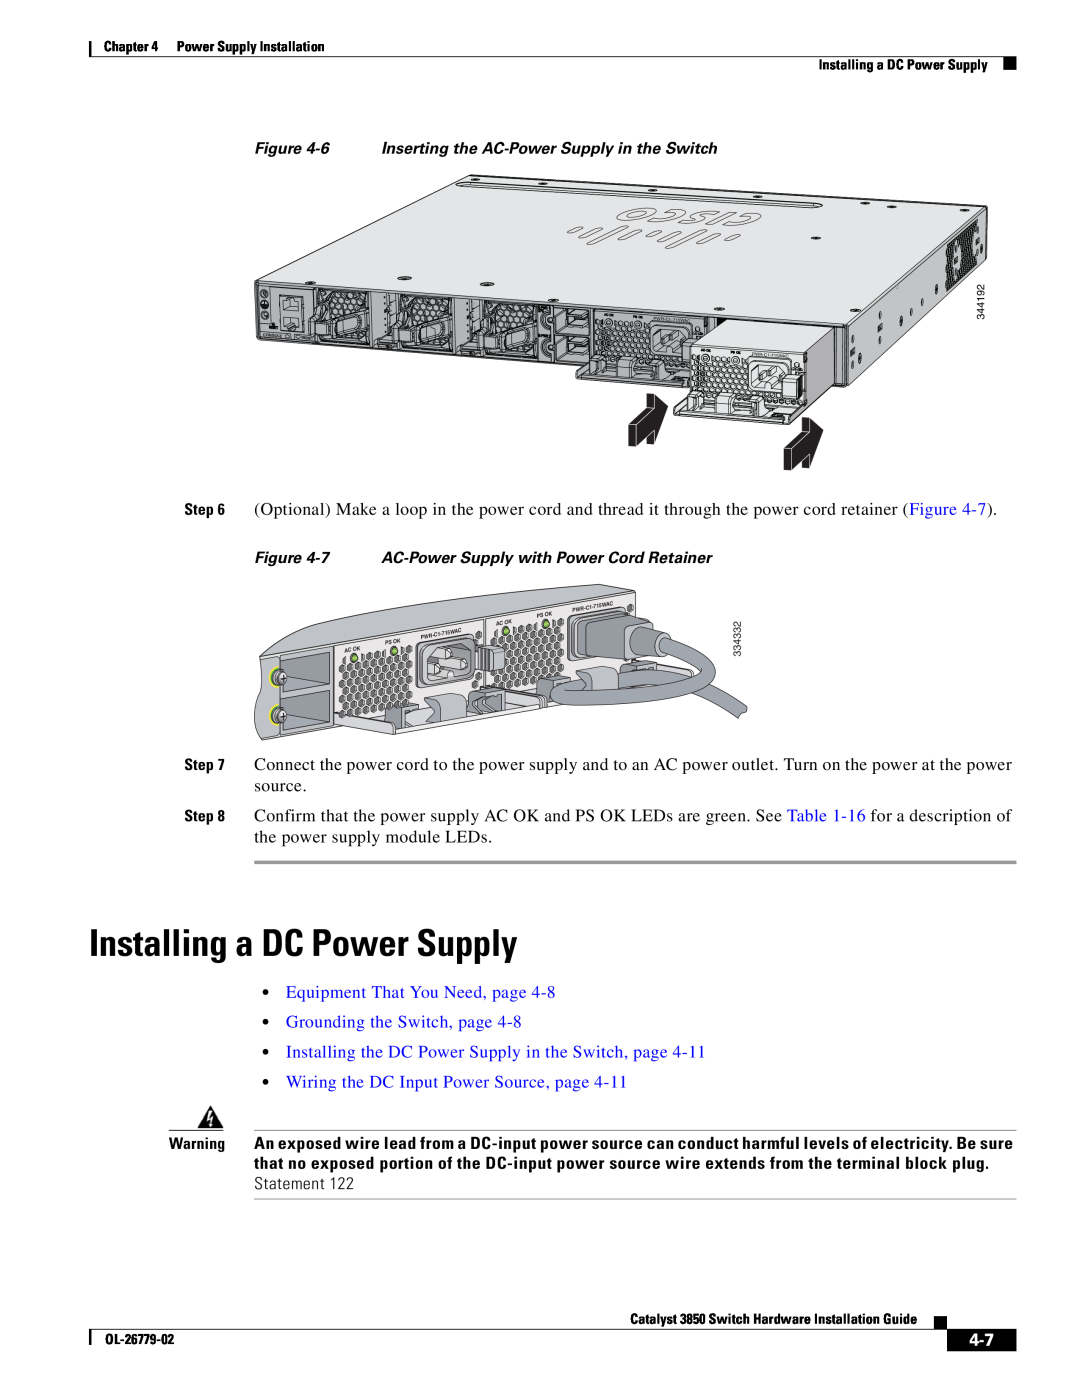 Cisco Systems WSC385024TS manual Installing a DC Power Supply, Equipment That You Need, page Grounding the Switch, page 